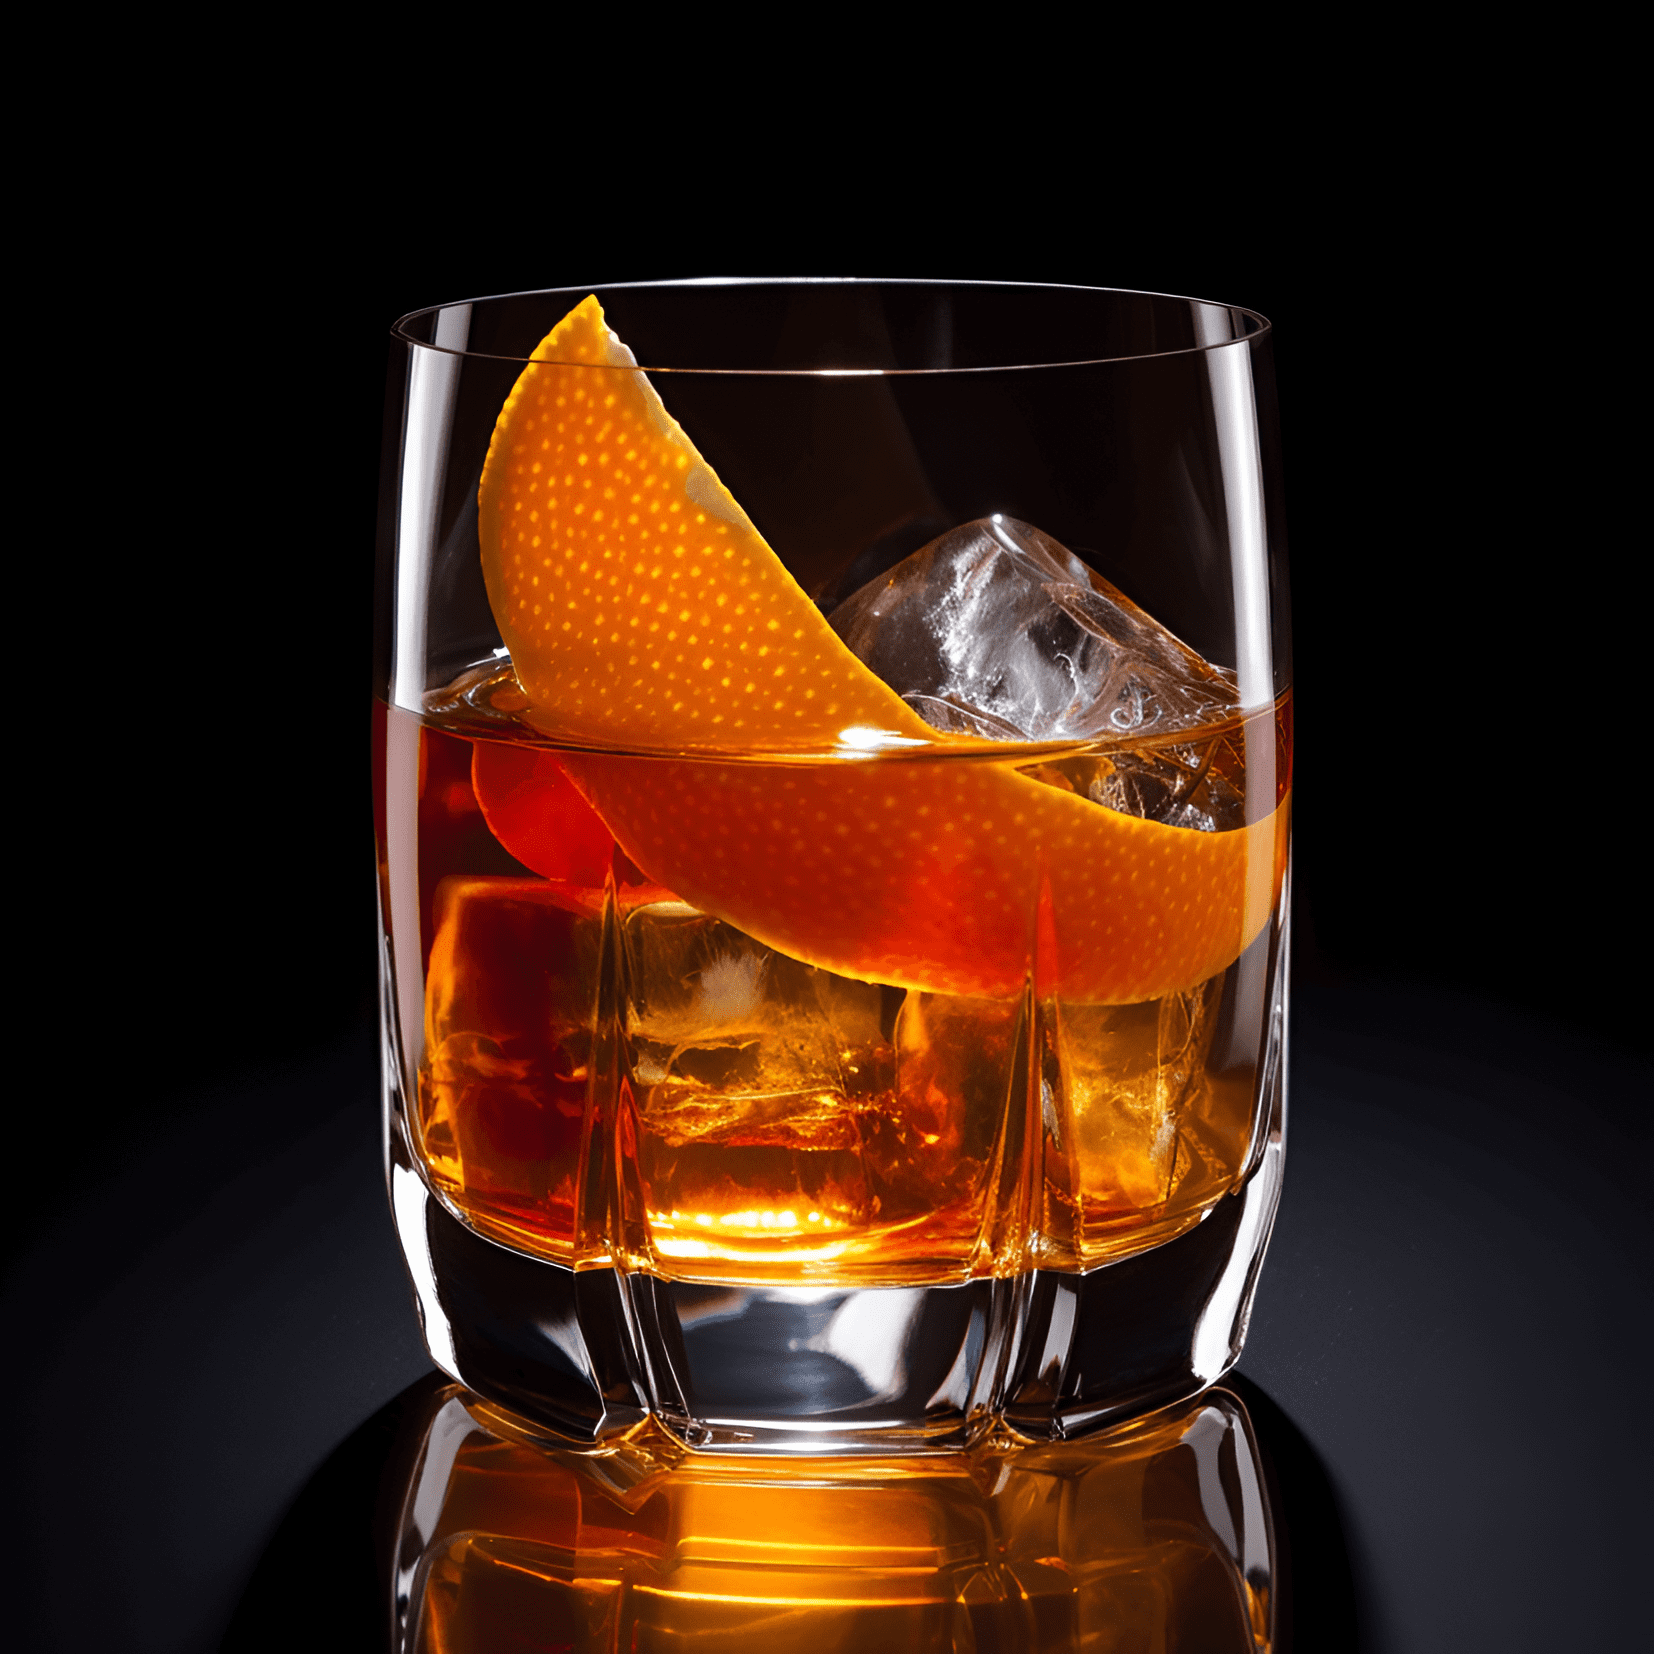 Cognac Old Fashioned Cocktail Recipe - The Cognac Old Fashioned has a smooth, rich, and slightly sweet taste with notes of oak, vanilla, and caramel. The cognac provides a warm, full-bodied flavor, while the sugar and bitters add a touch of sweetness and complexity.